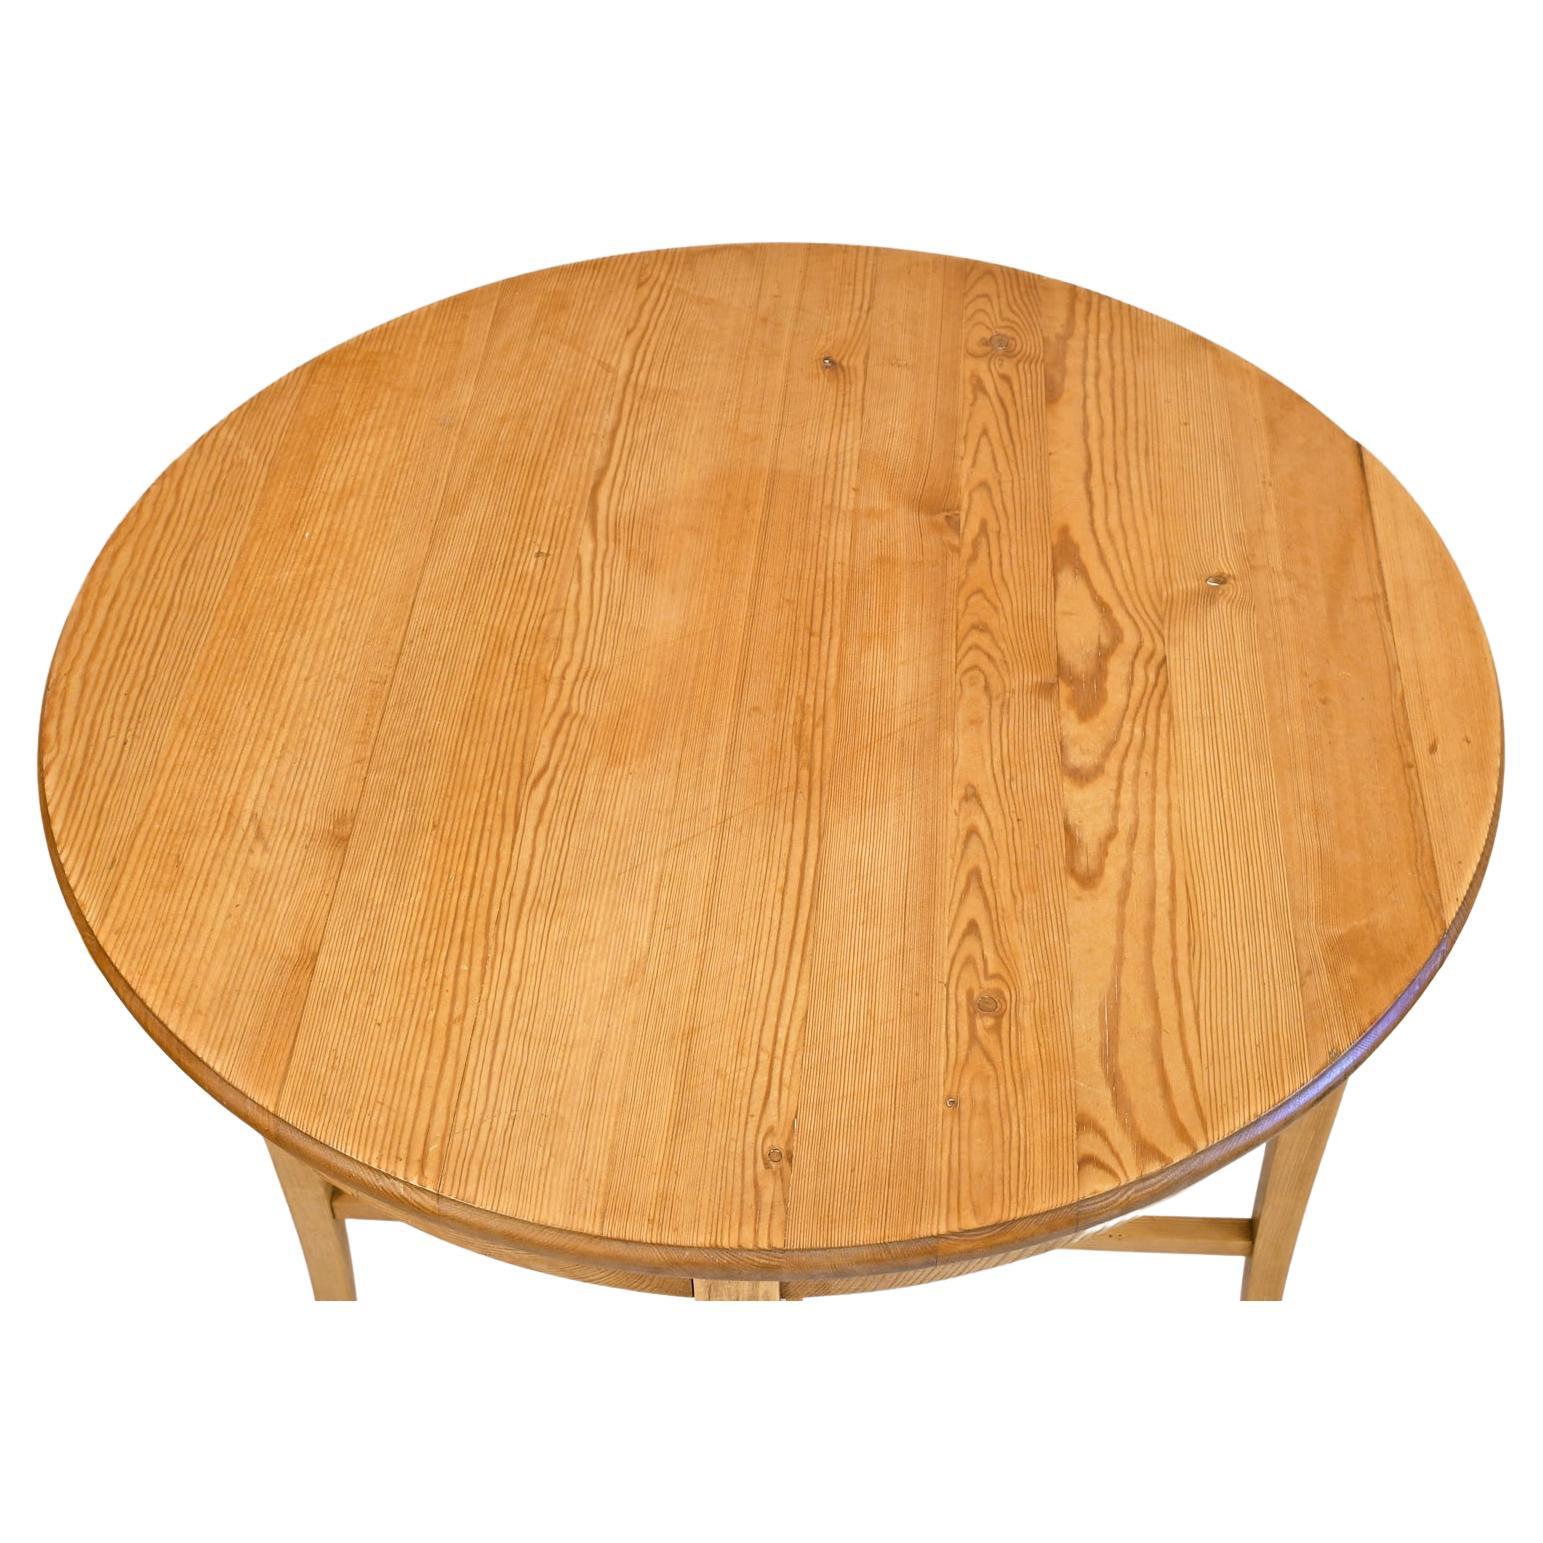 Hand-Crafted Small Antique Scandinavian Round End/ Side Table in Pine, Denmark, circa 1920